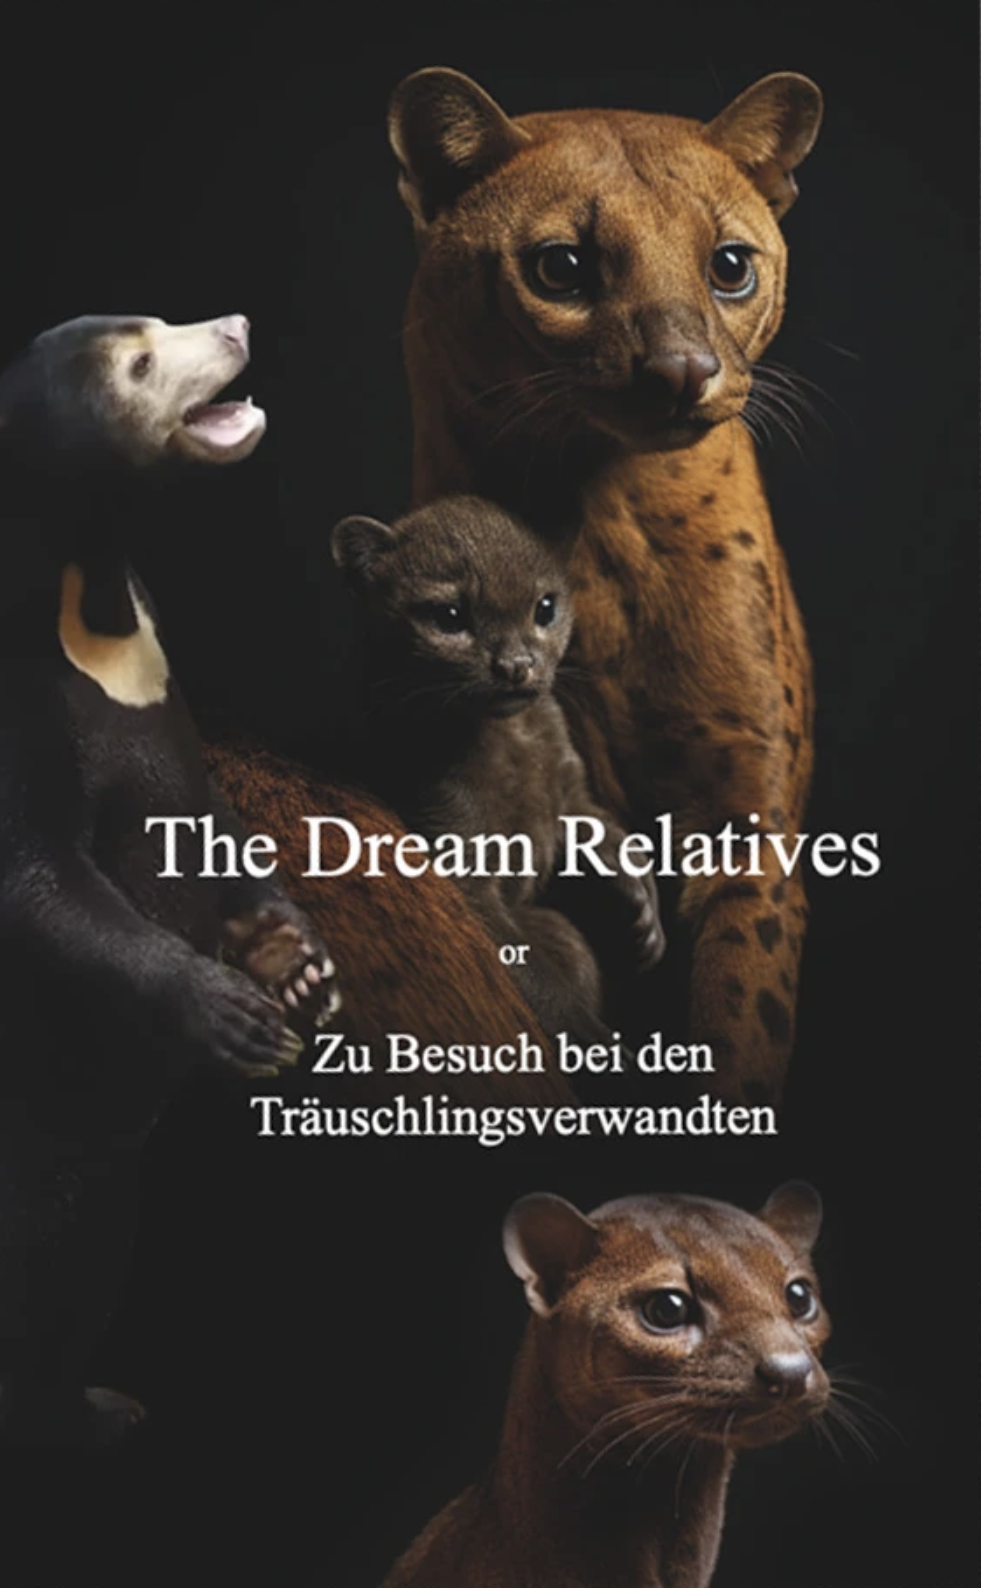 Tina BraeggerThe Dream Relatives or Zu Besuch bei den TräuschlingsverwandtenLast night Emanuelle Iris had a very strange dream... Painter and ghostwriter, Emanuelle Iris, is traveling back to her family when she finds herself drawn into a series of inexplicable encounters. With her eye for detail and insatiable curiosity, Emanuelle takes us on a thrillingly quotidian adventure, encompassing artificial intelligence, online scammers and her own private life. As the story unfolds, she starts questioning her ability to differentiate between dreams and her everyday reality.